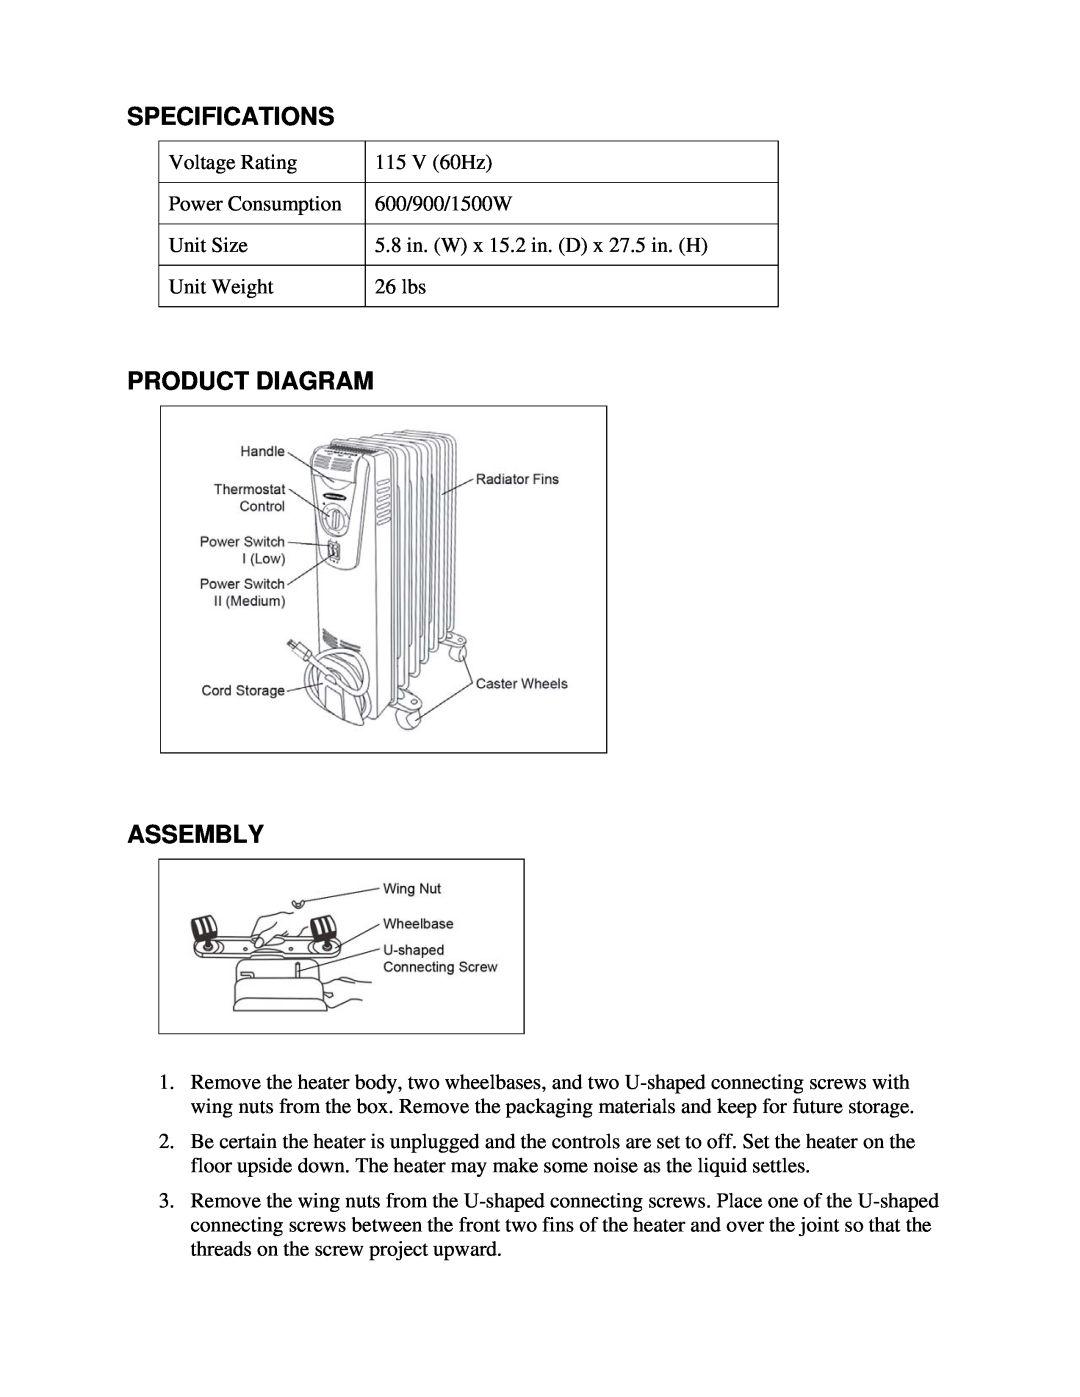 Soleus Air NDY-15 owner manual Specifications, Product Diagram Assembly 